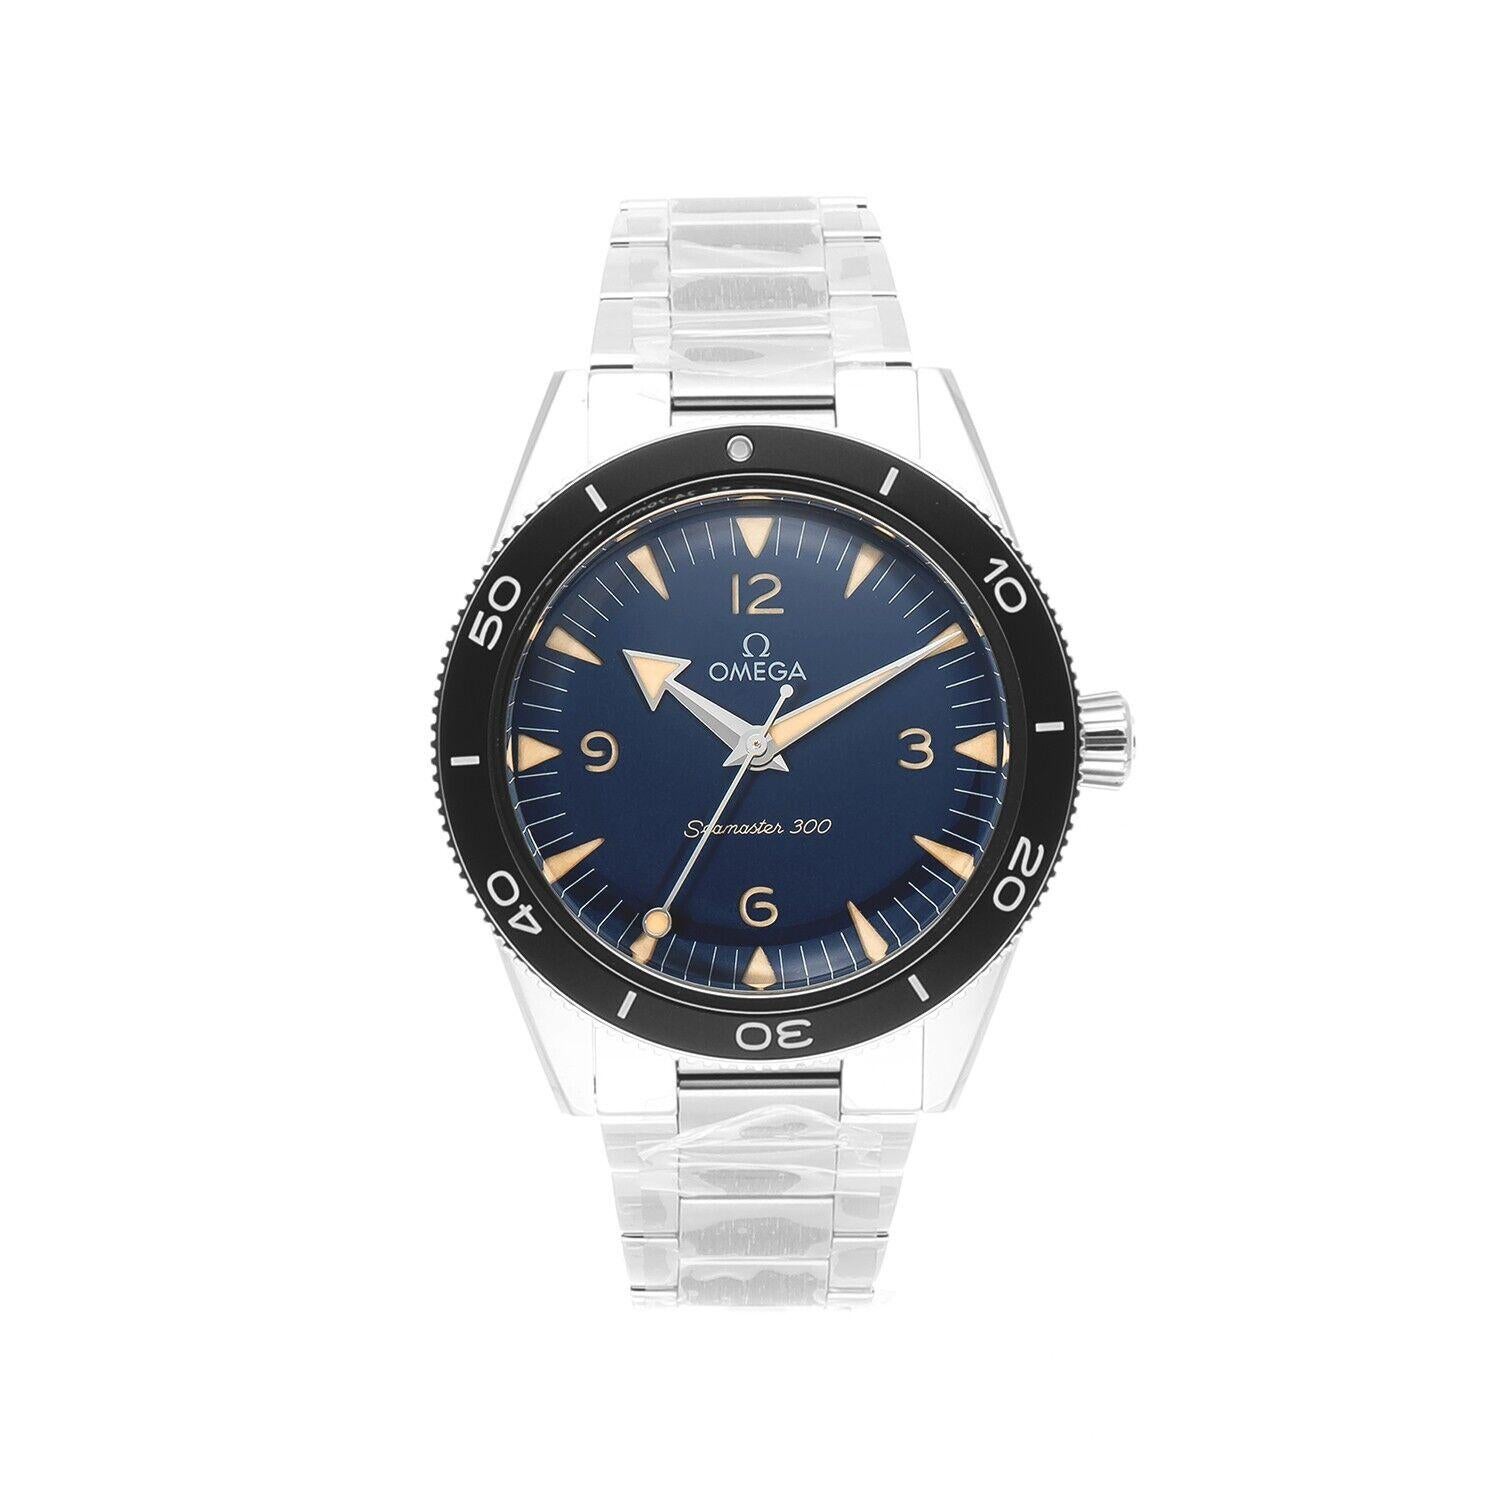 This 41 mm stainless steel model includes a blue dial and a blue oxalic anodized aluminium bezel with its diving scale filled with vintage Super-LumiNova. The recessed hour markers and open numerals feature Super-LumiNova, which is also present on